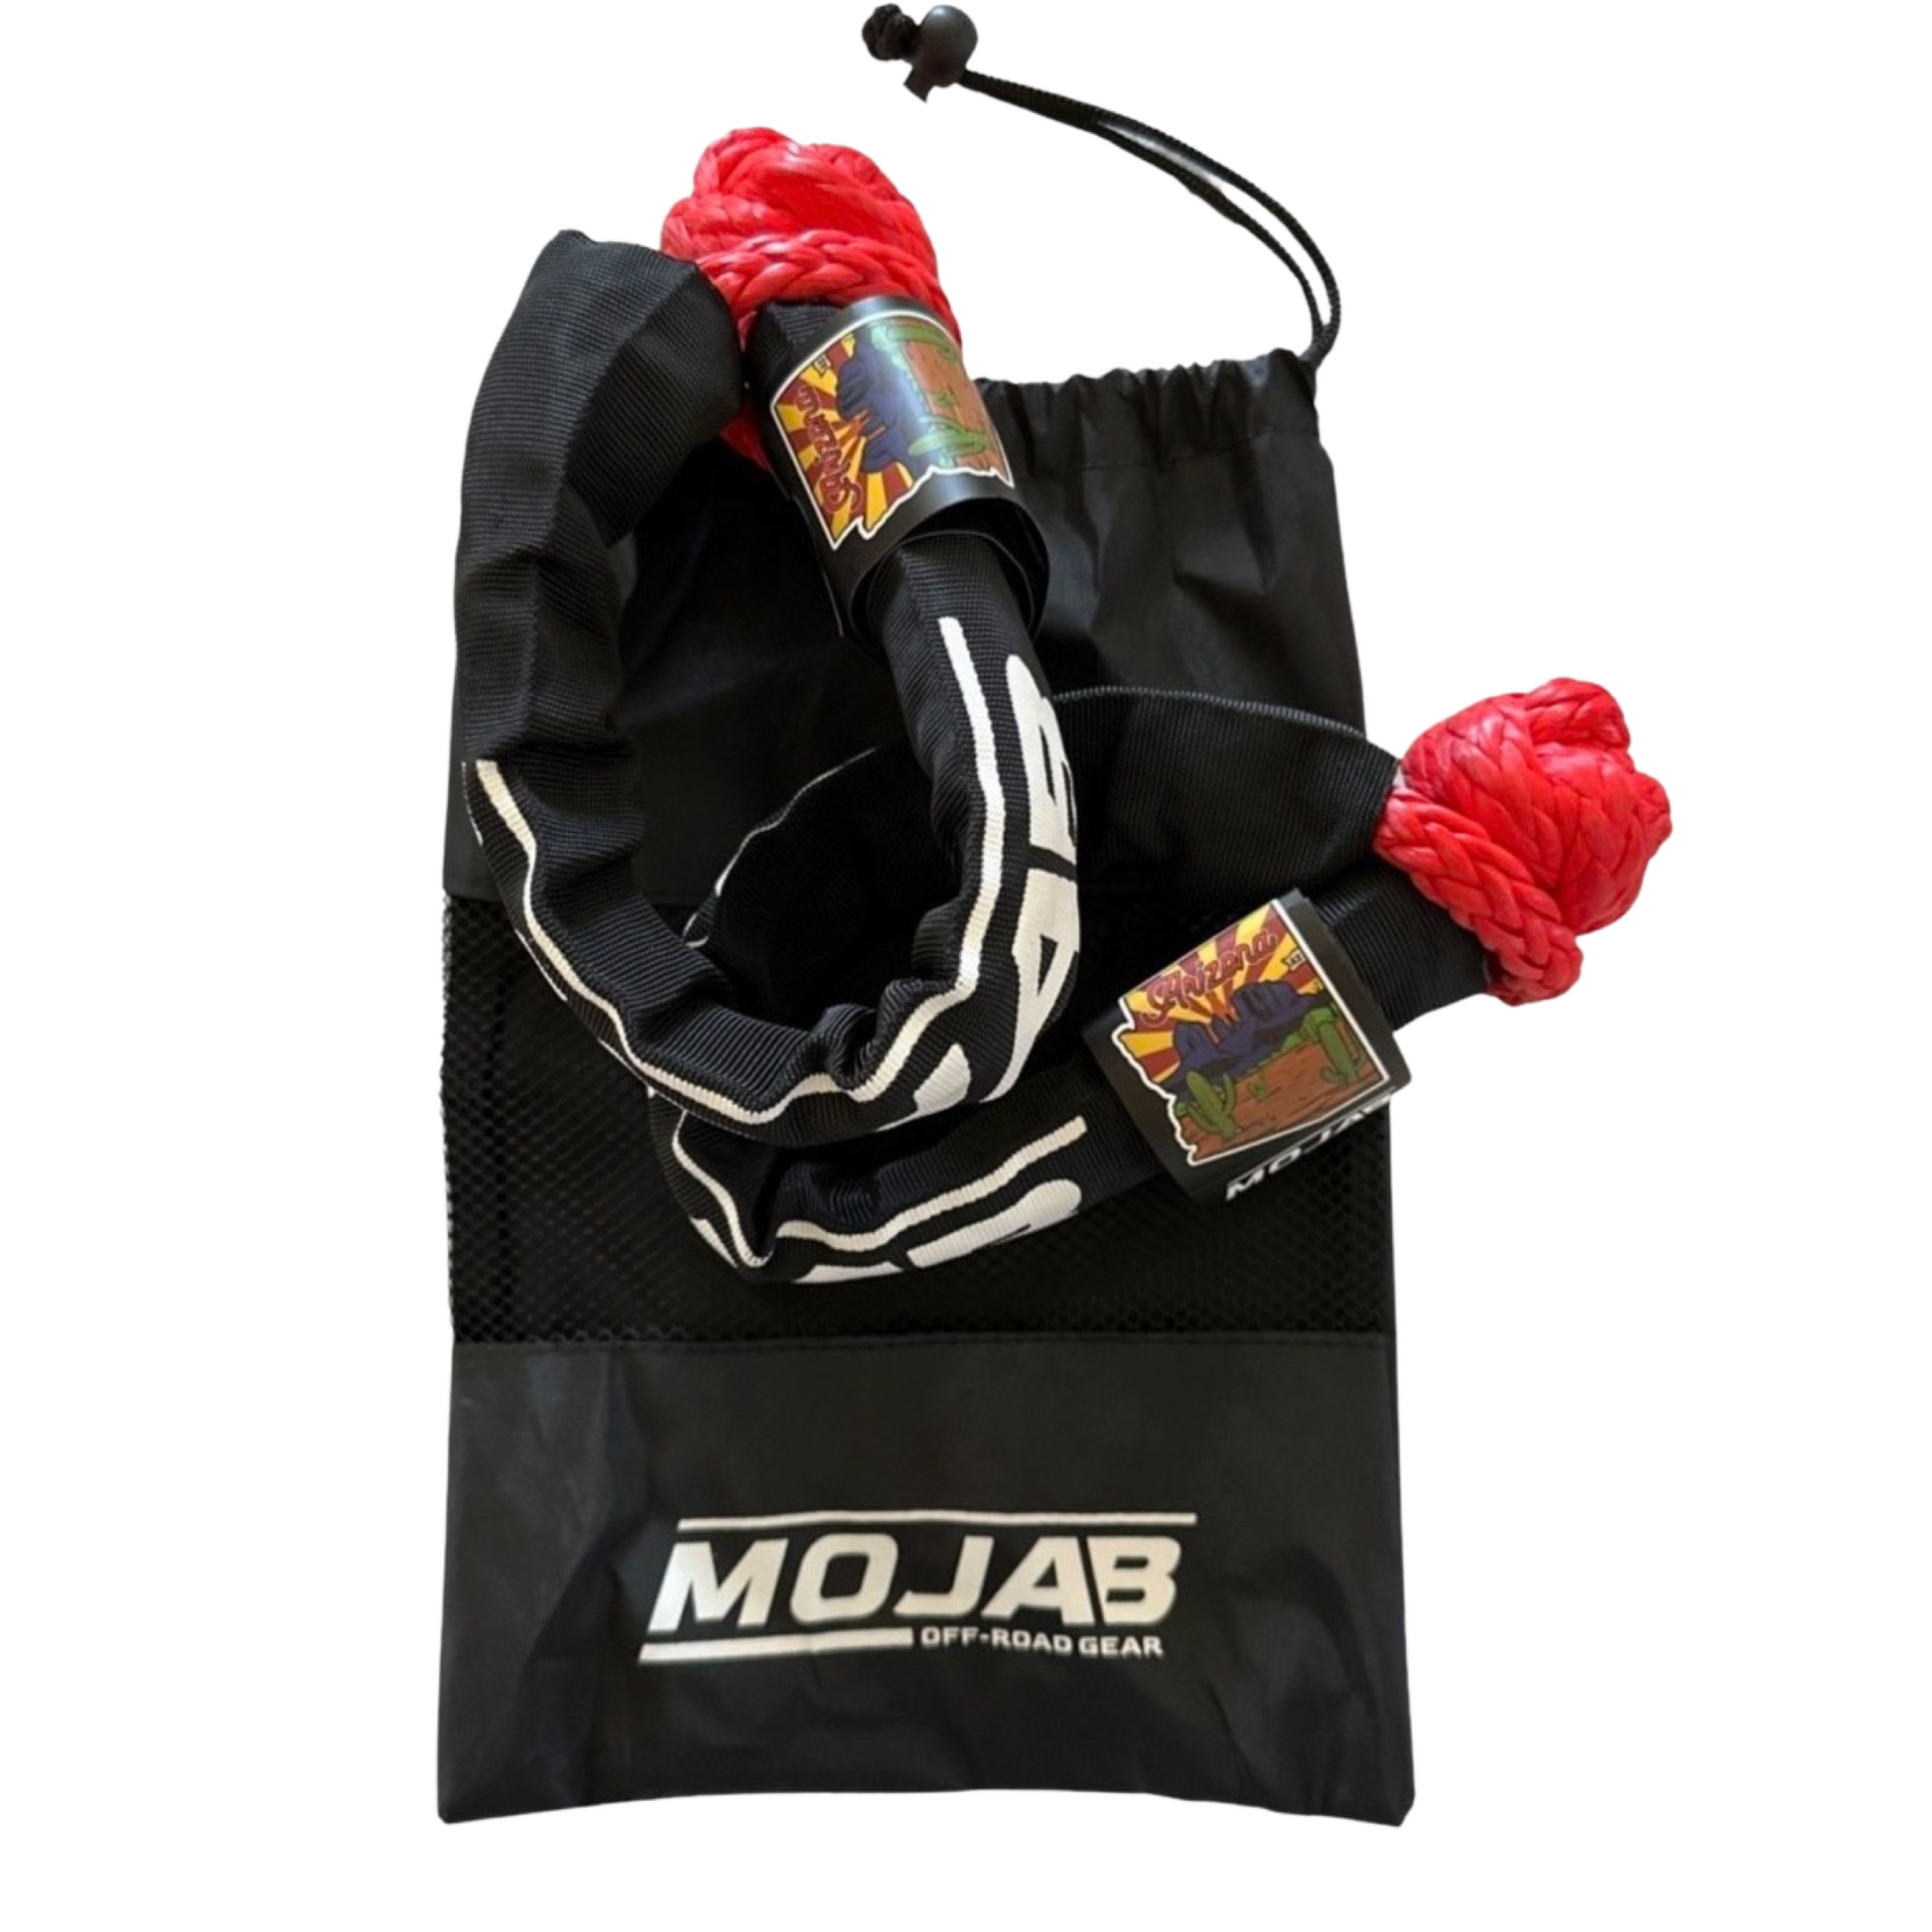 MOJAB OFFROAD Essential Recovery Kit (7 items, 3 Storage bag, 2